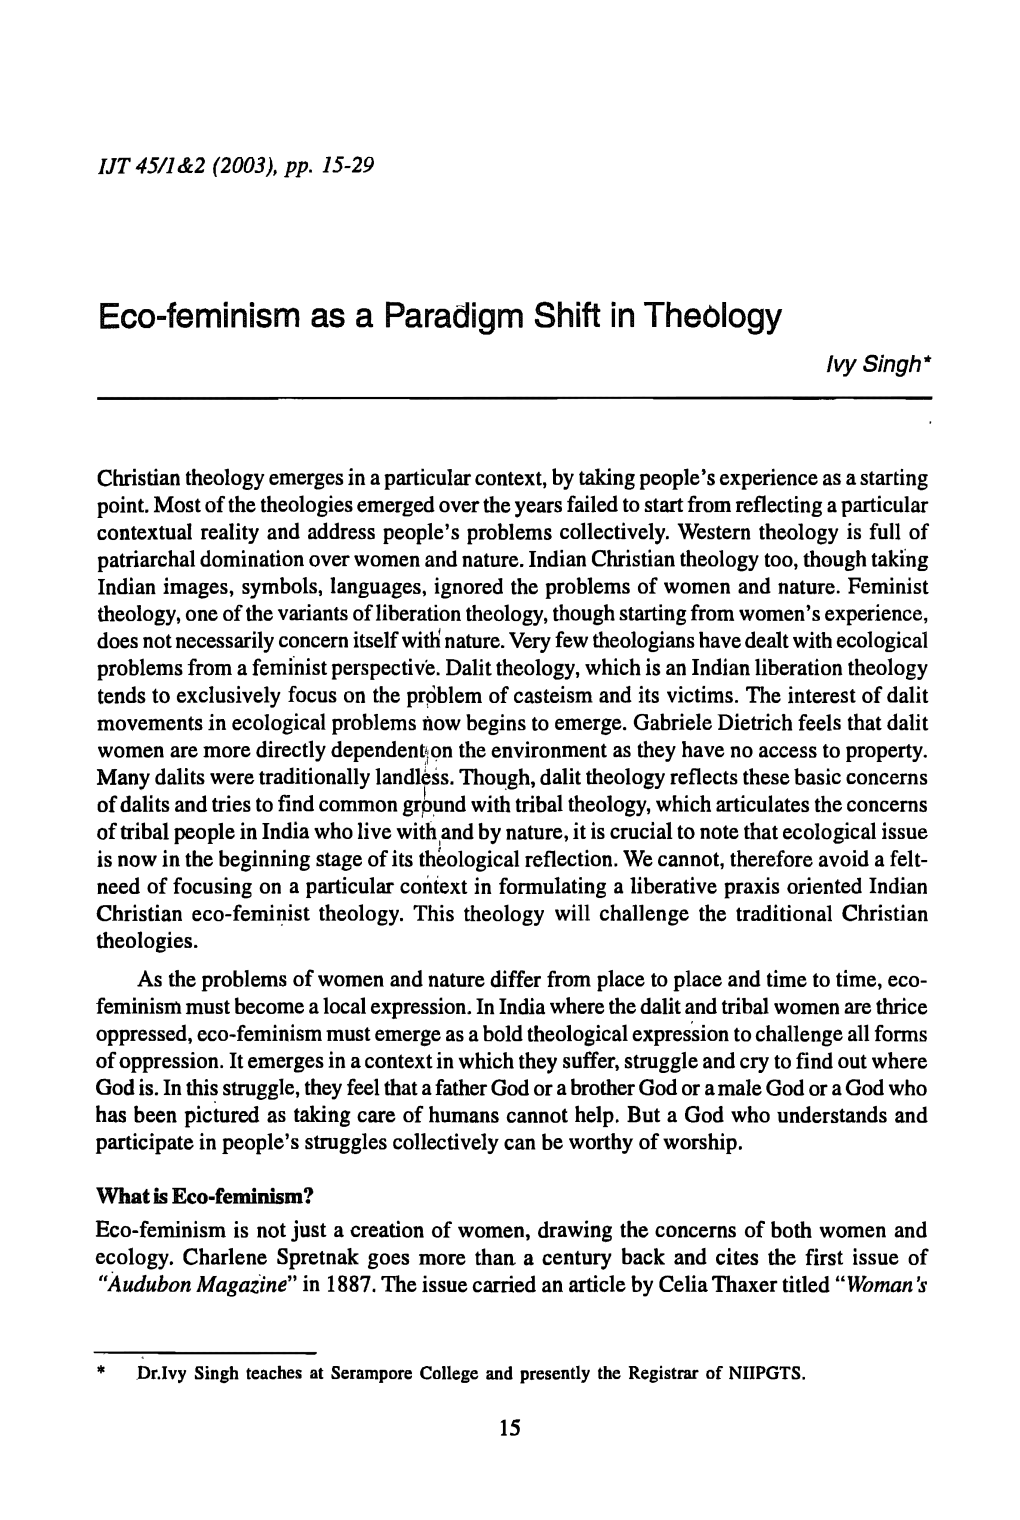 Ivy Singh, "Eco-Feminism As a Paradigm Shift in Theology," Indian